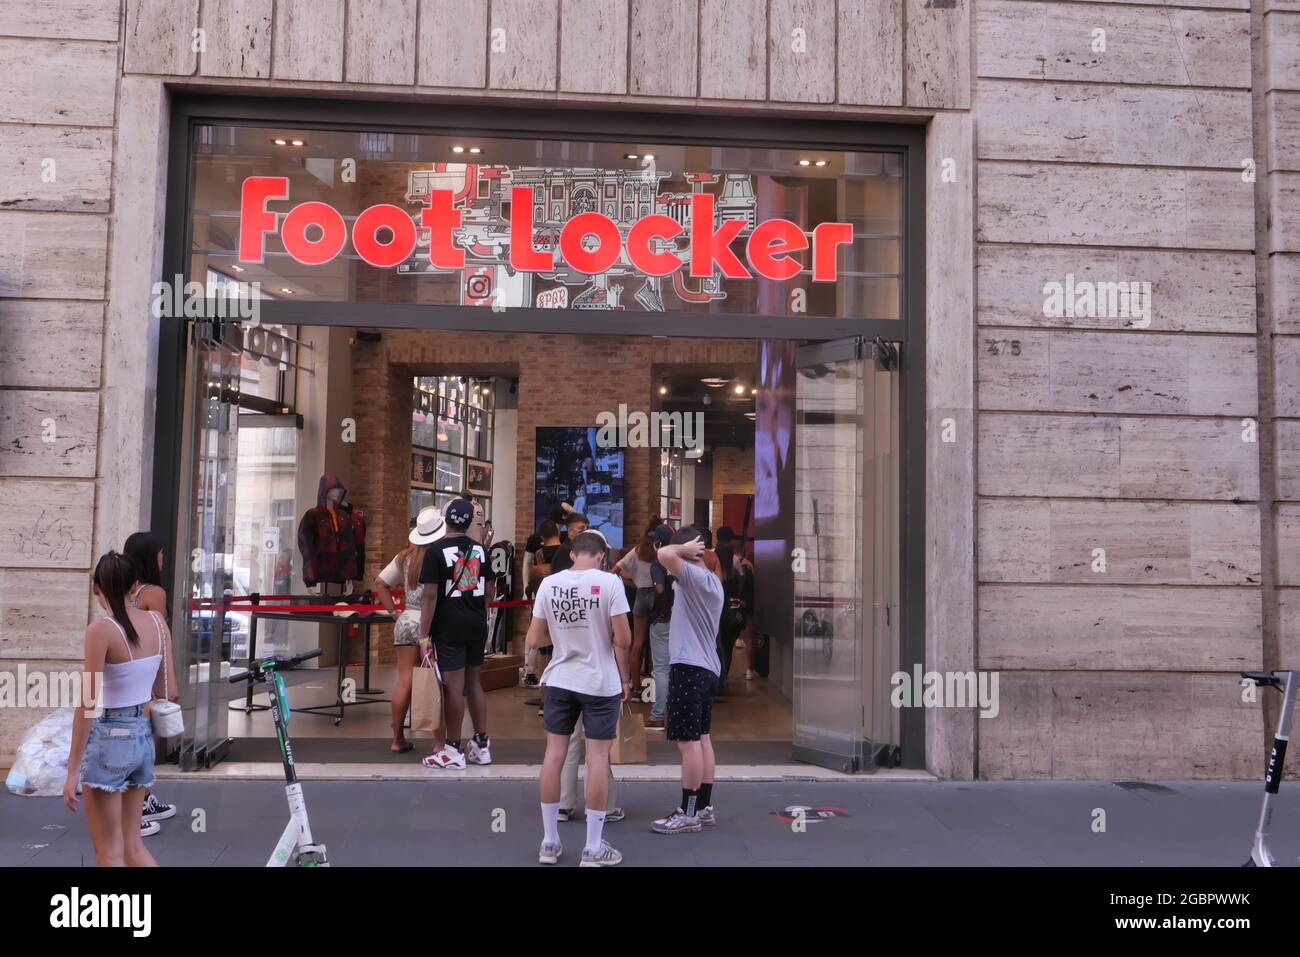 FOOT LOCKER FASHION SHOES STORE ENTRANCE IN CORSO STREET Stock Photo - Alamy